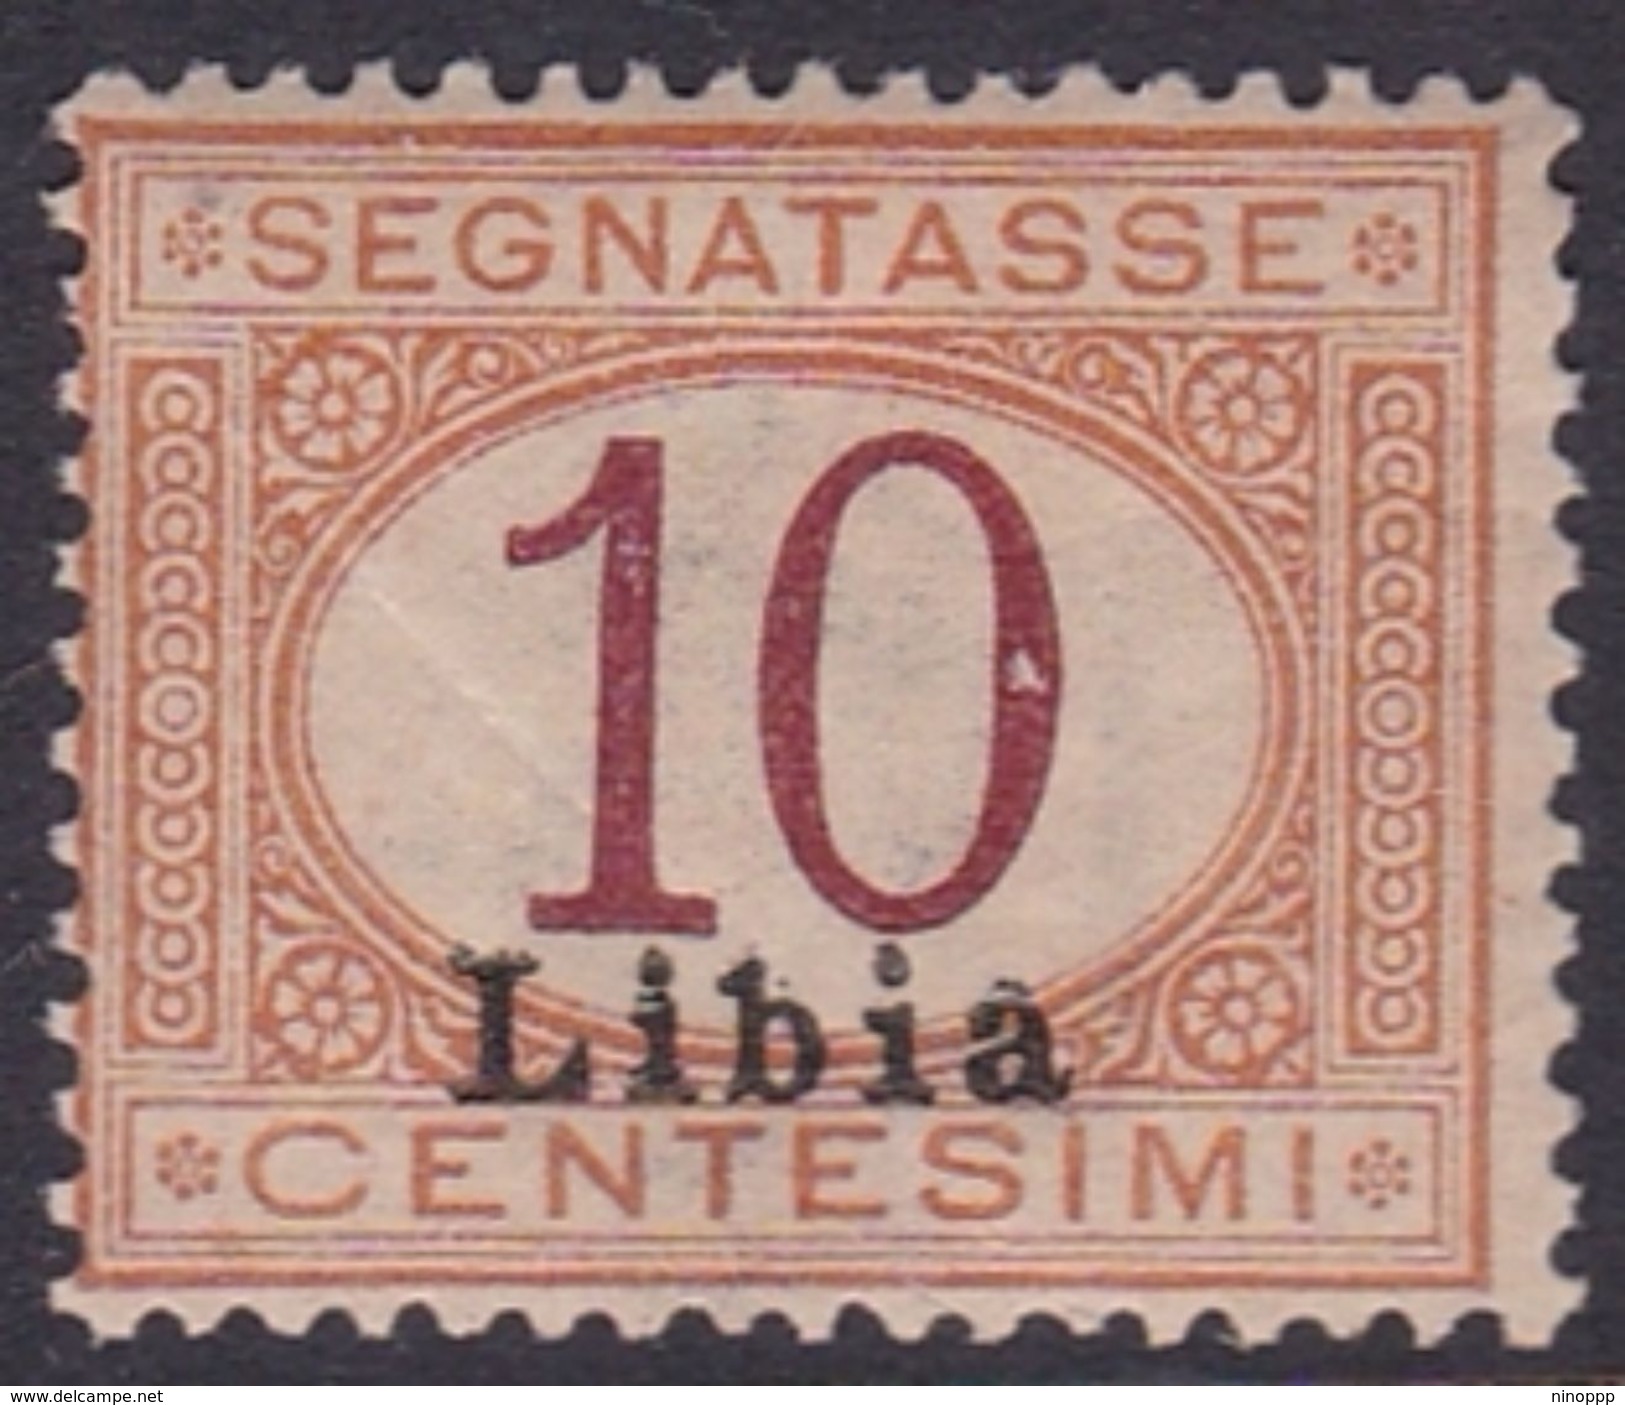 Italy-Colonies And Territories-Libya PD 2 1915 Postage Due,10c Orange And Carmine,mint Hinged - Libya